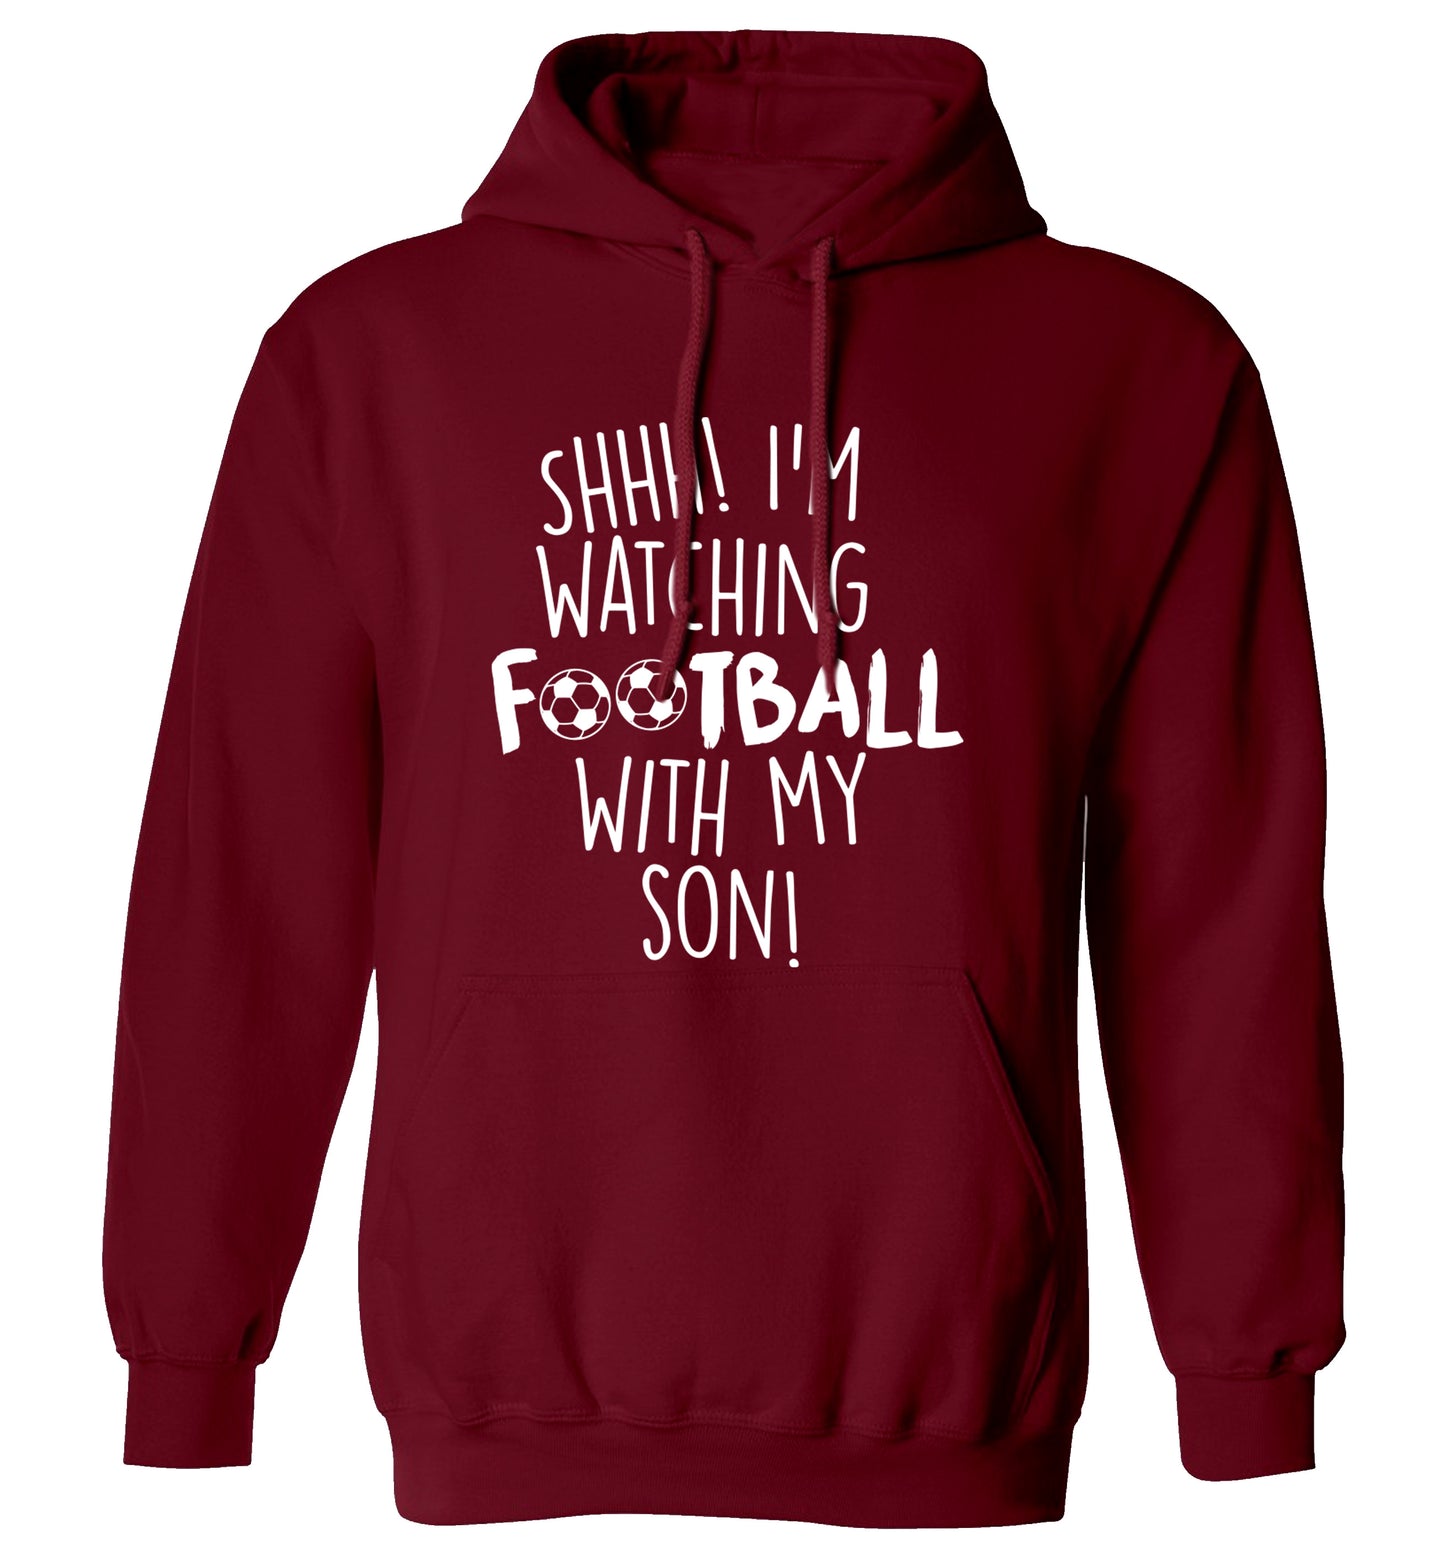 Shhh I'm watching football with my son adults unisexmaroon hoodie 2XL